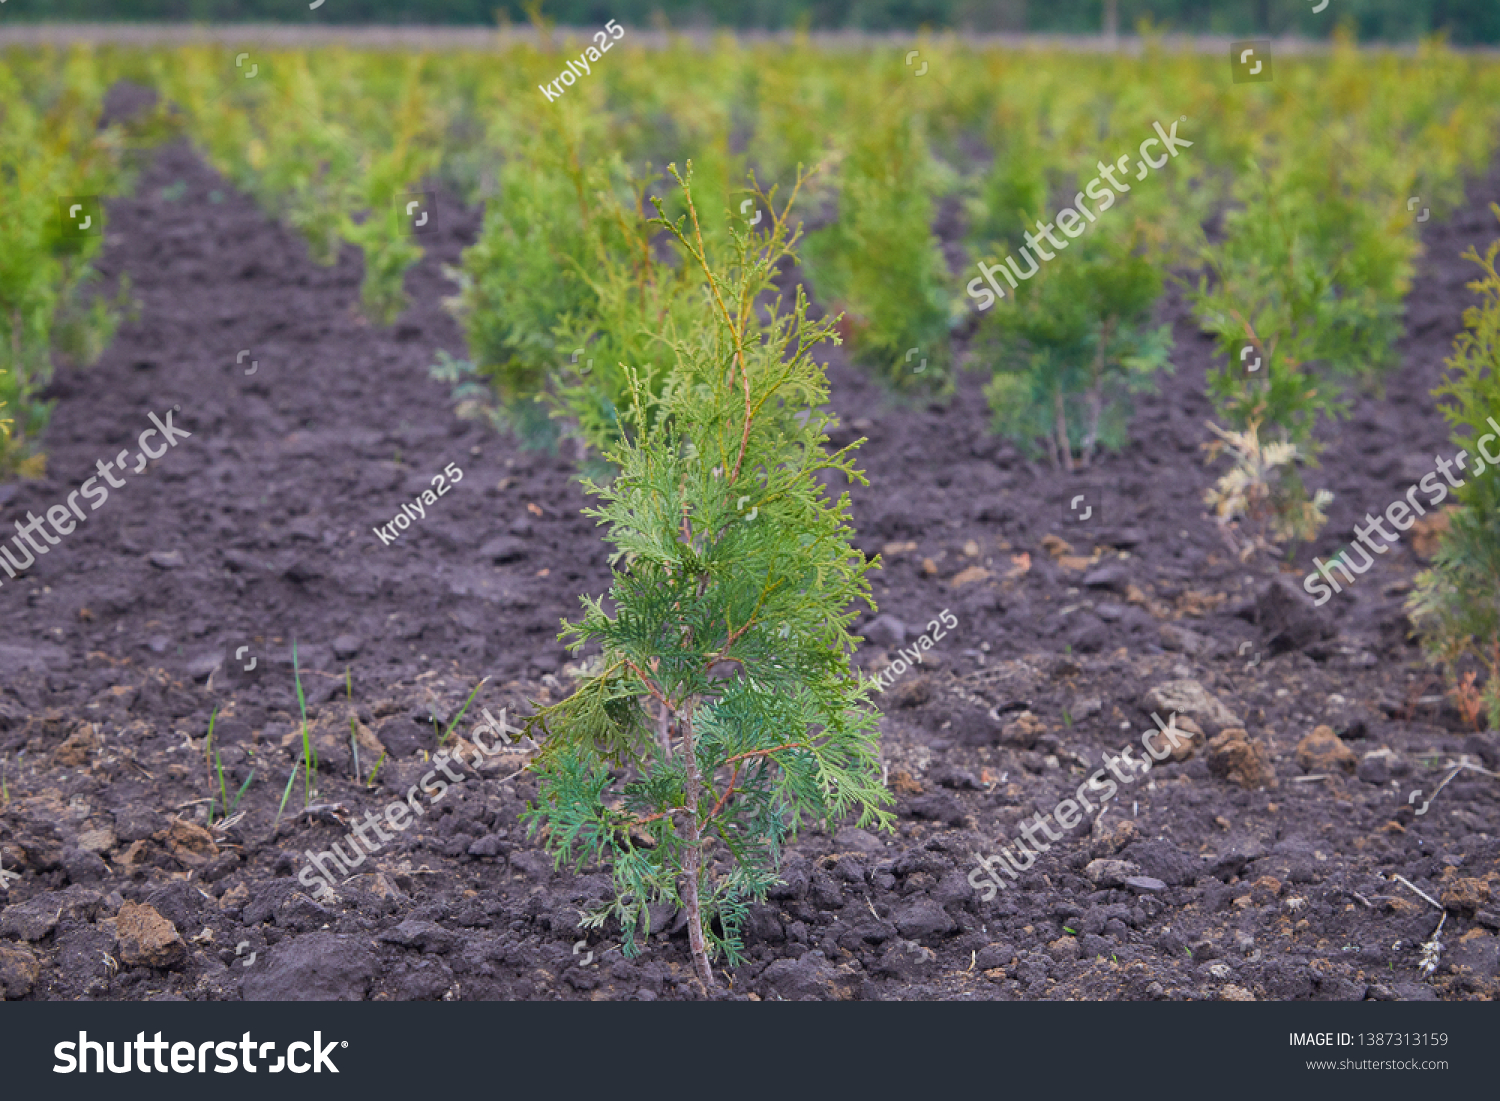 Thuja occidentalis in garden center. Plant nursery. Decorative potted plant at flower shop #1387313159